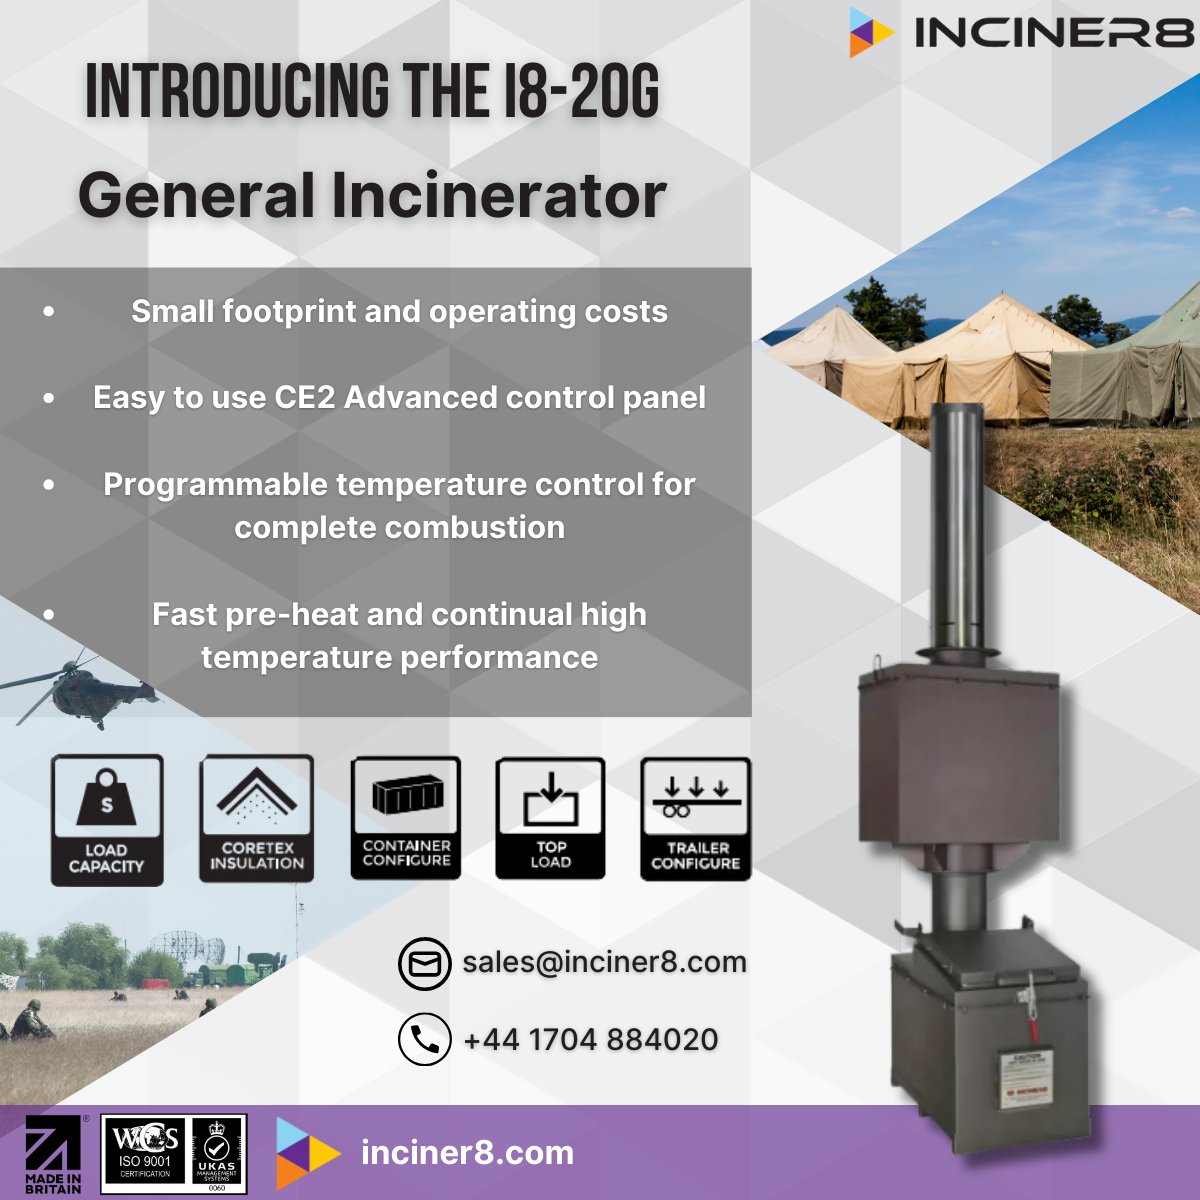 Looking for an affordable, clean-air incineration solution?
Meet the i8-20G, perfect for small camps, businesses, or communities with low waste streams.

💻Visit our website:
bit.ly/3JEgB8M
📨Email sales@inciner8.com for a quick quote
📞Or call us on +44 1704 884020